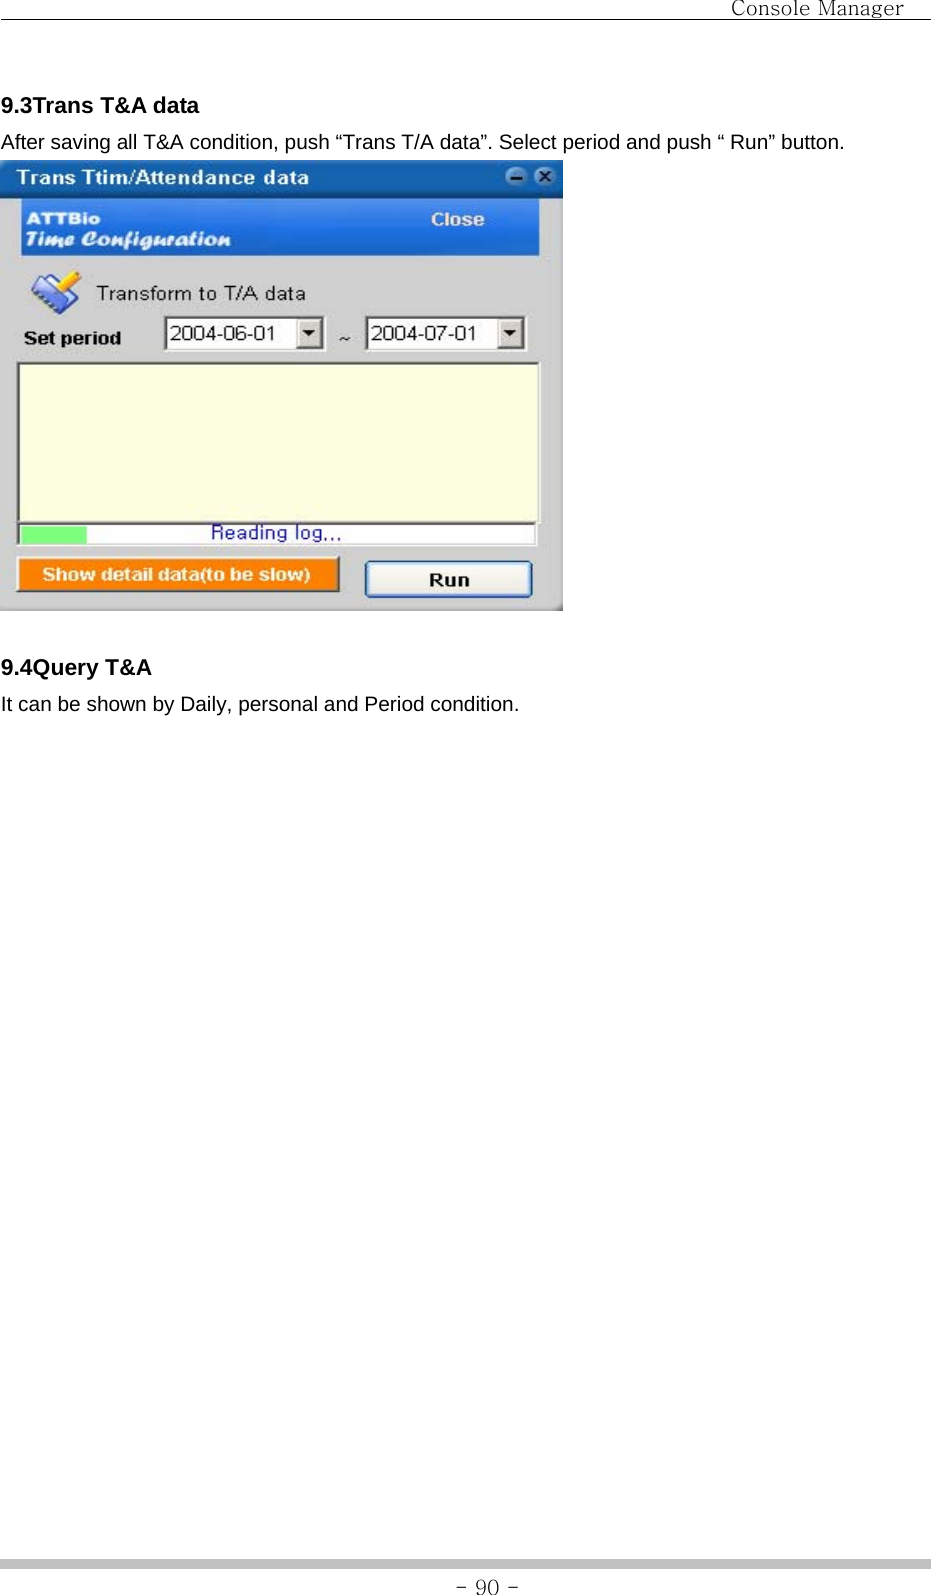                                Console Manager               - 90 -9.3Trans T&amp;A data After saving all T&amp;A condition, push “Trans T/A data”. Select period and push “ Run” button.   9.4Query T&amp;A It can be shown by Daily, personal and Period condition.   